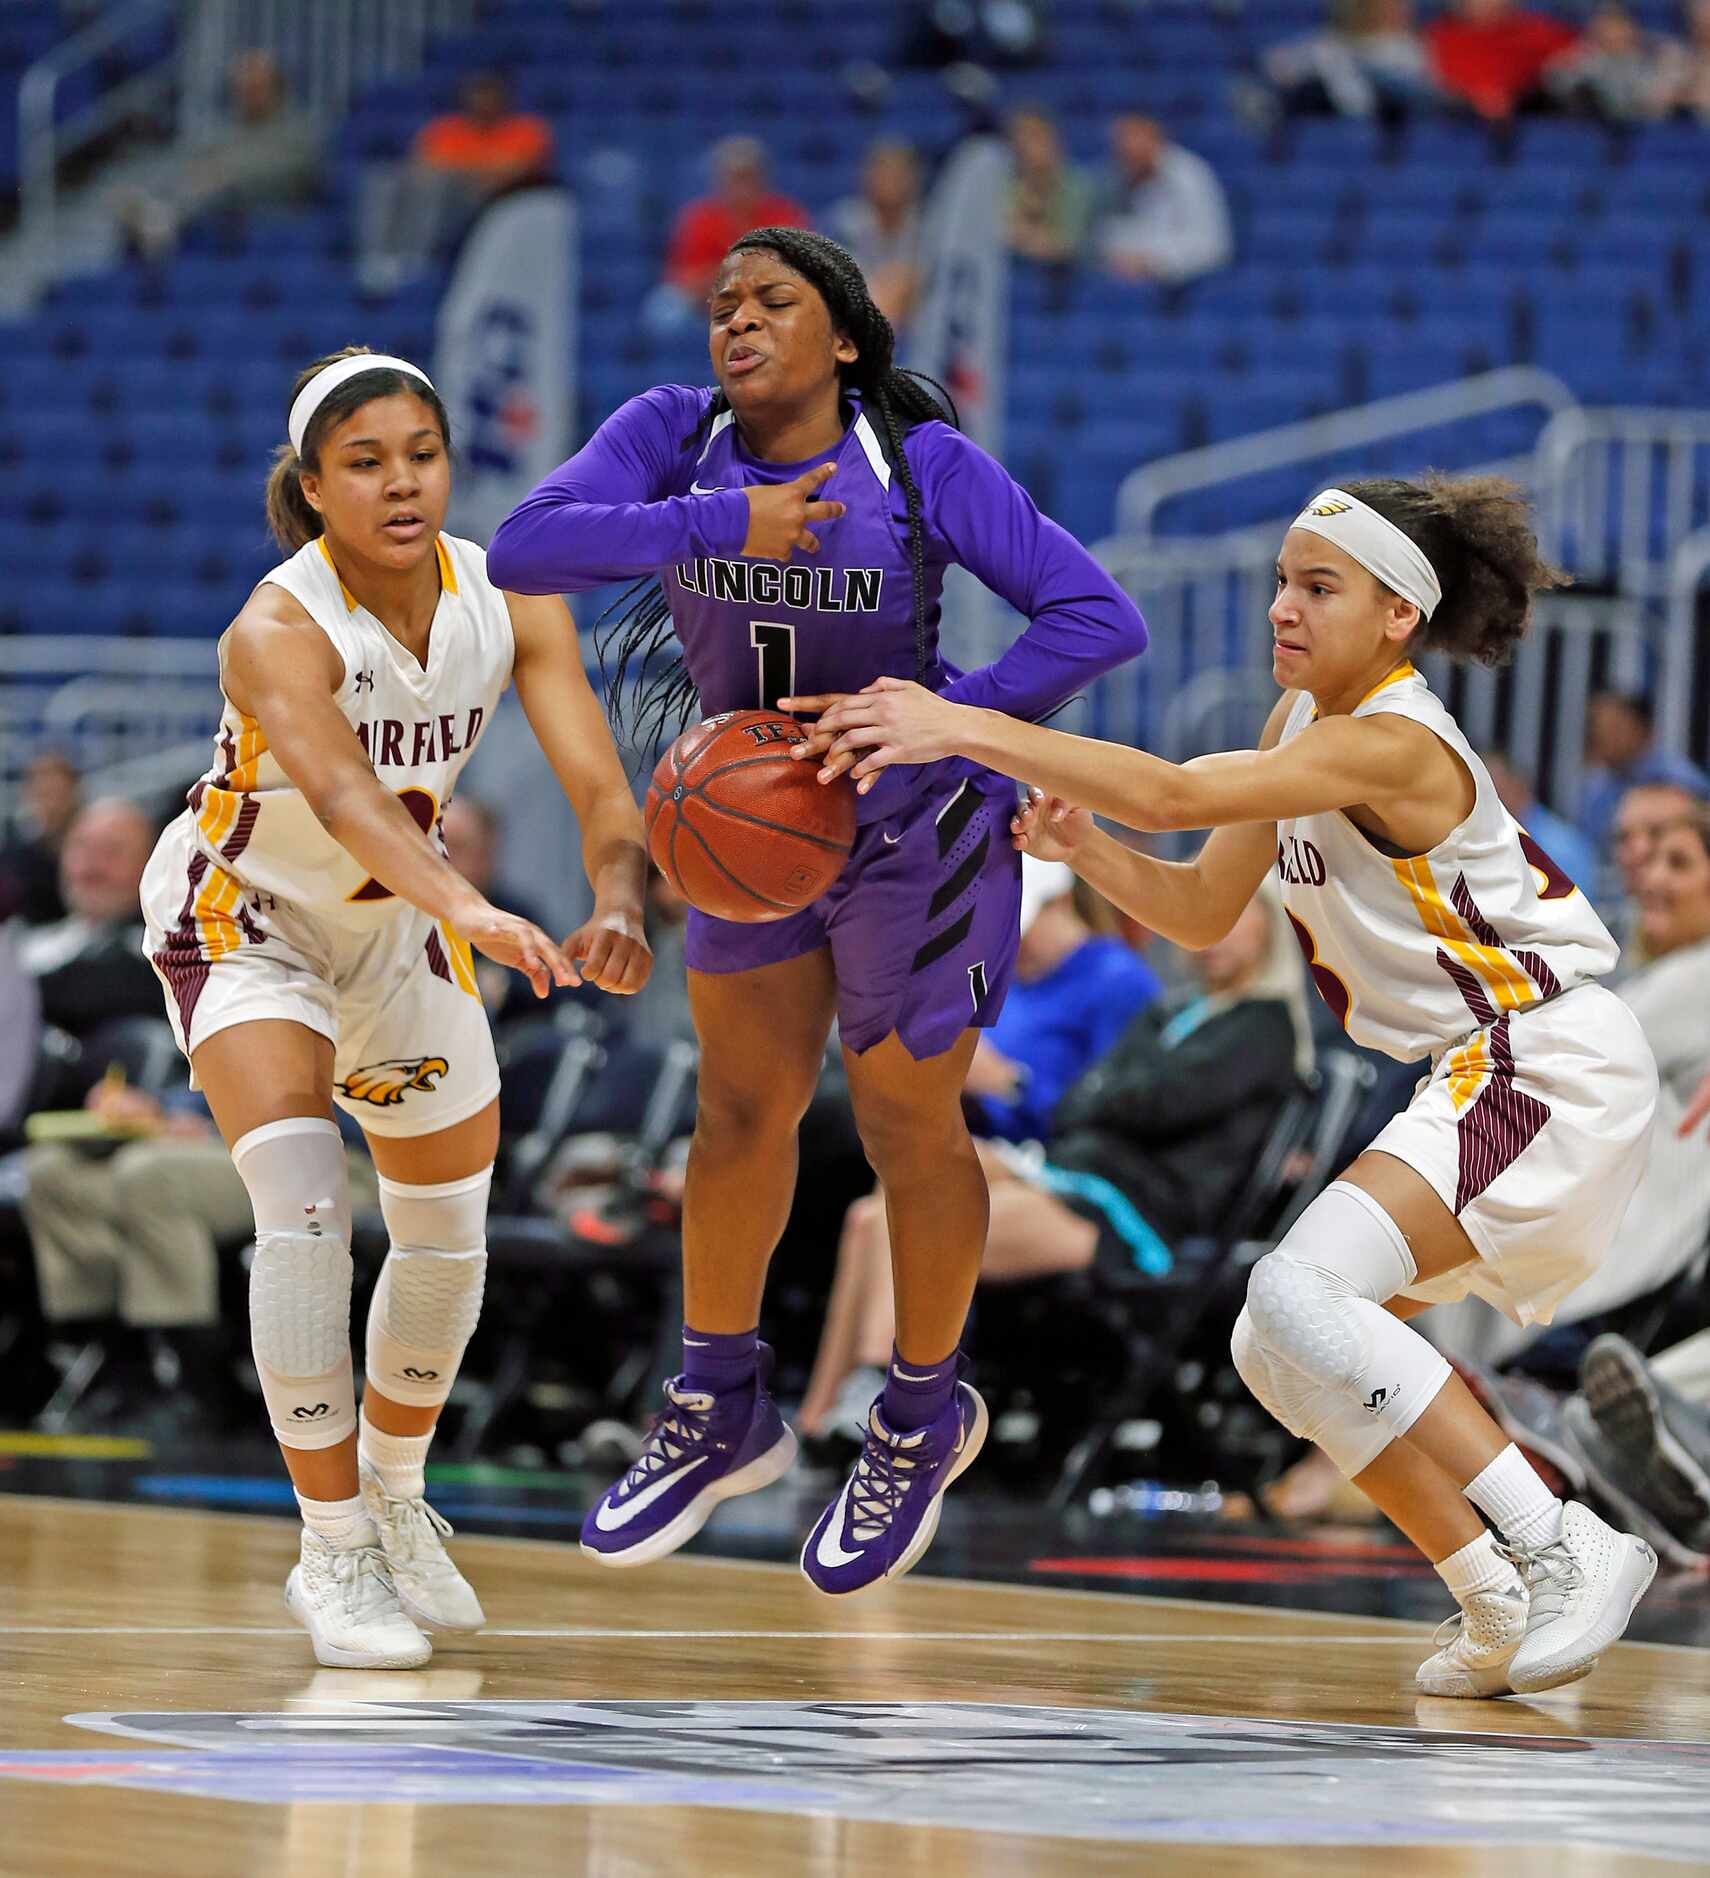 Lincoln guard Alexis Brown (#1) is stripped of the ball by Fairfield guard Jada Clark (#2)...